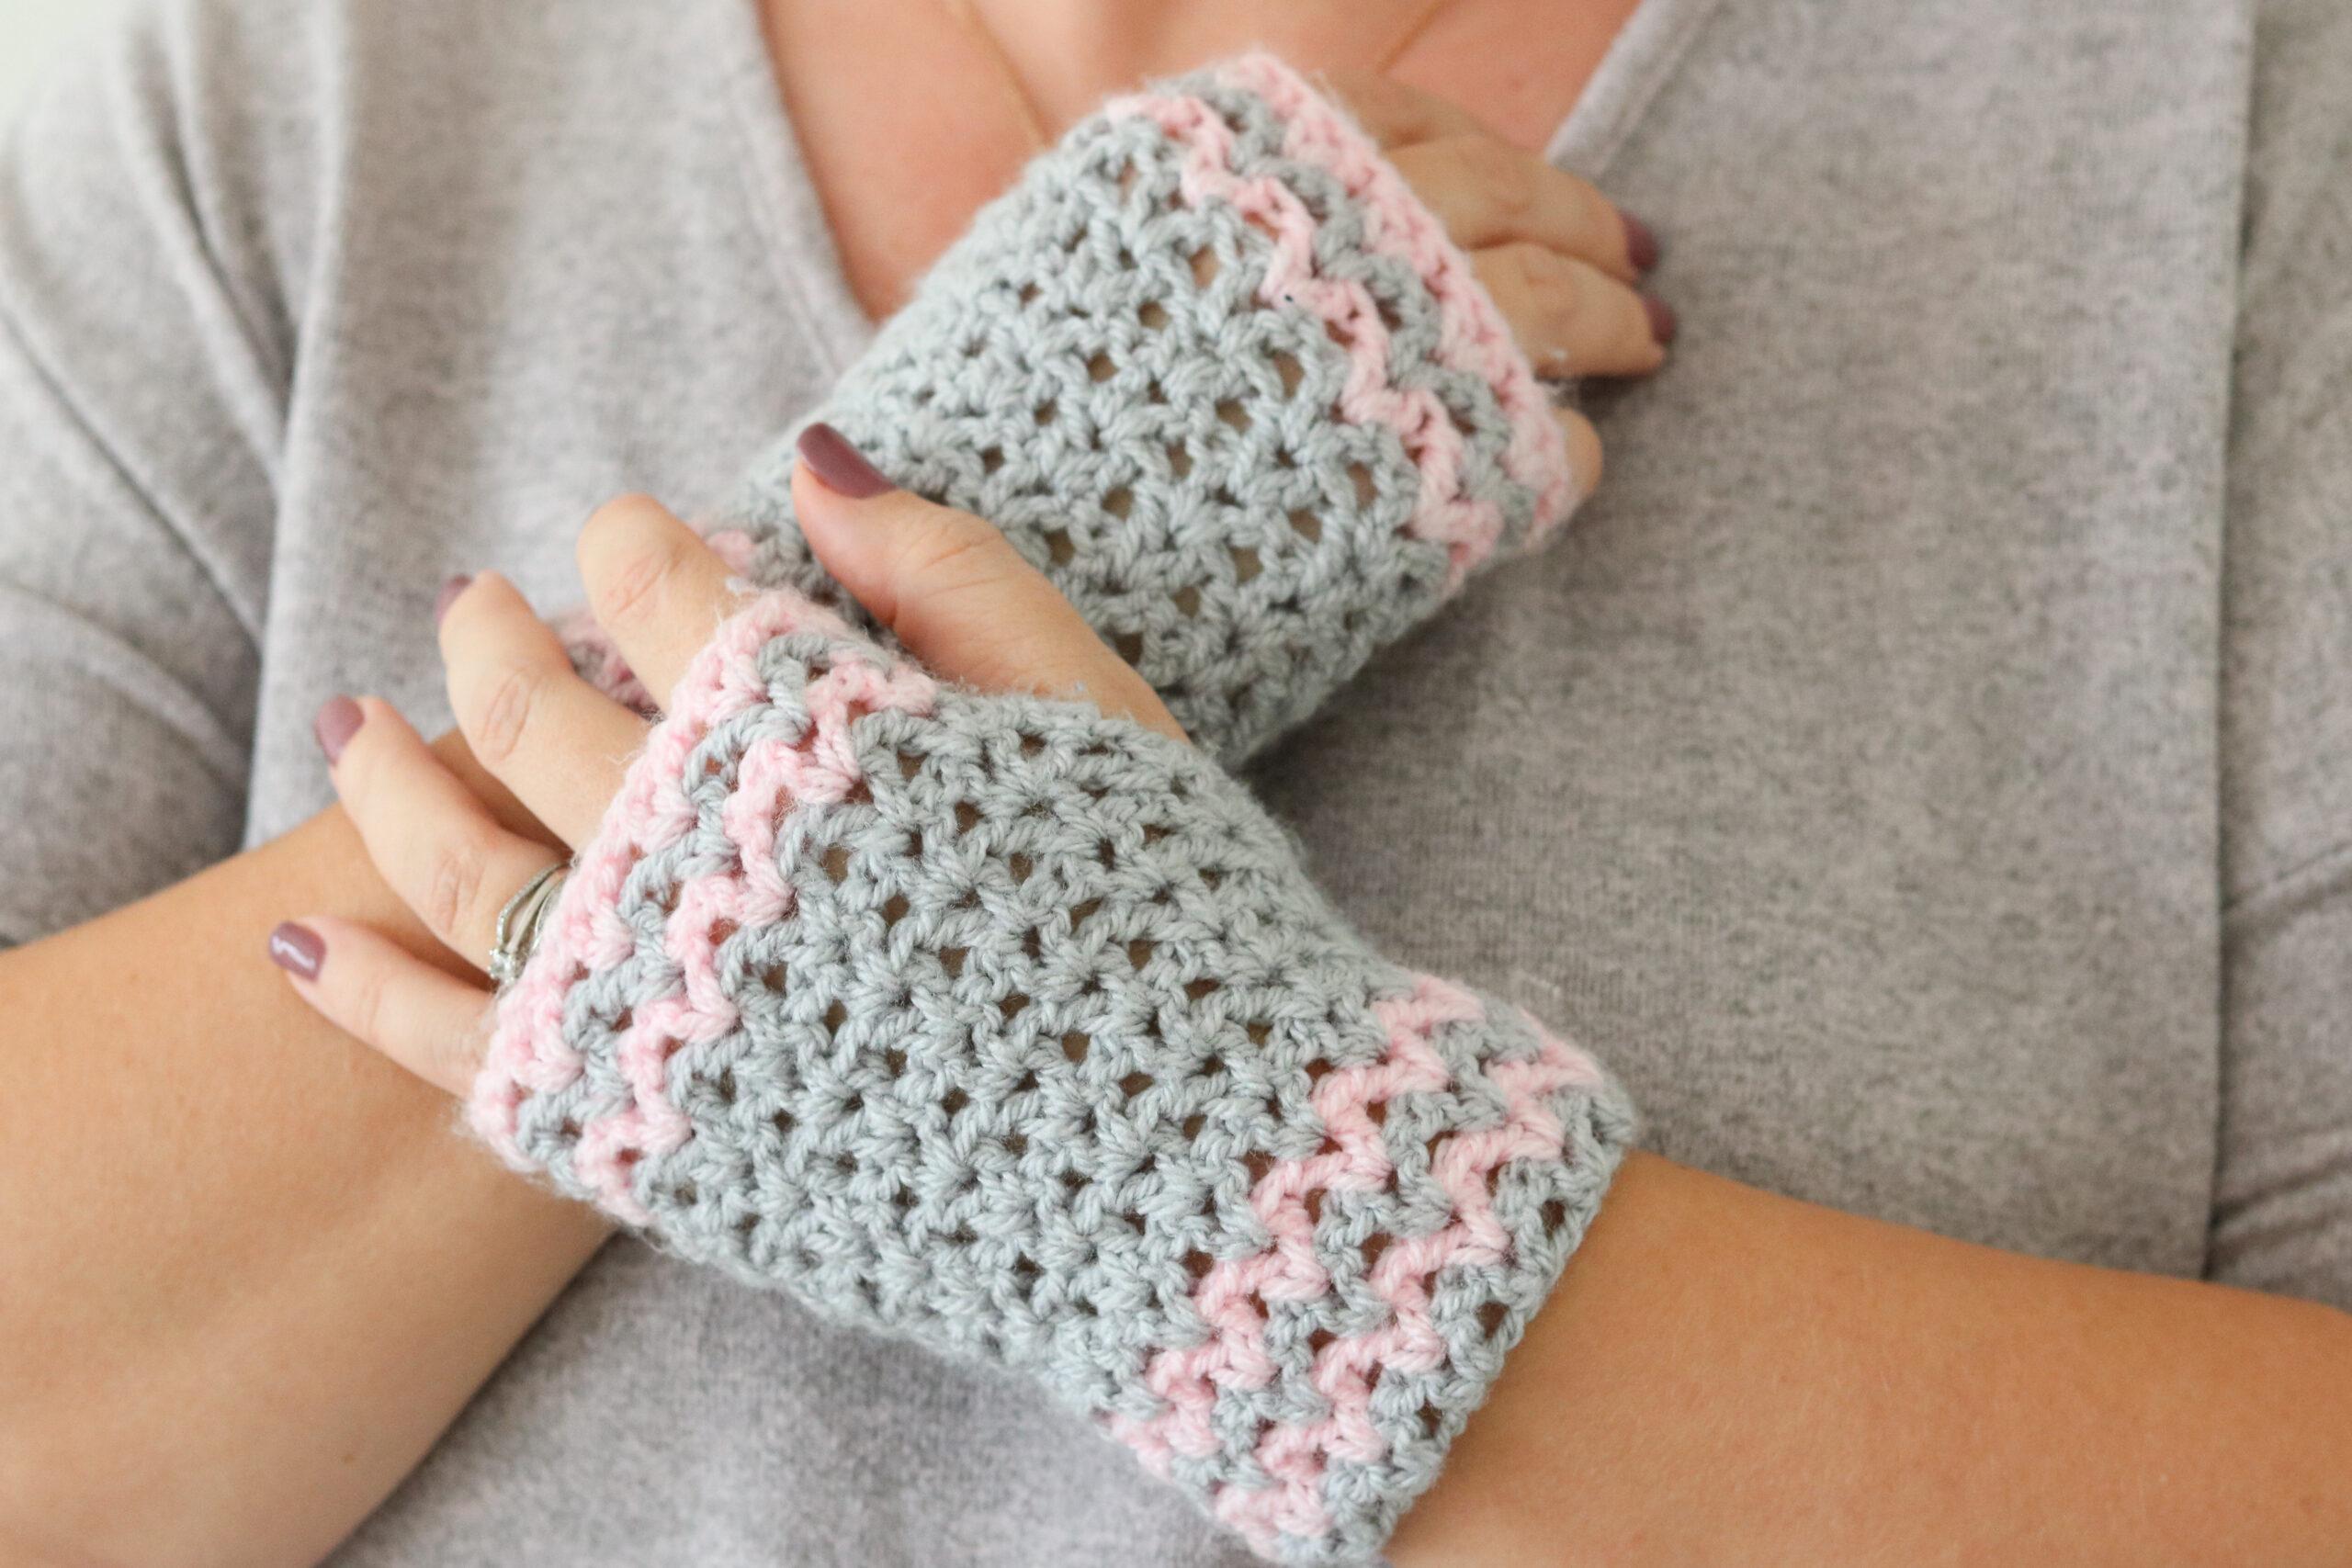 A pair of grey and pink crochet wrist warmers are worn by a woman in a grey tee.